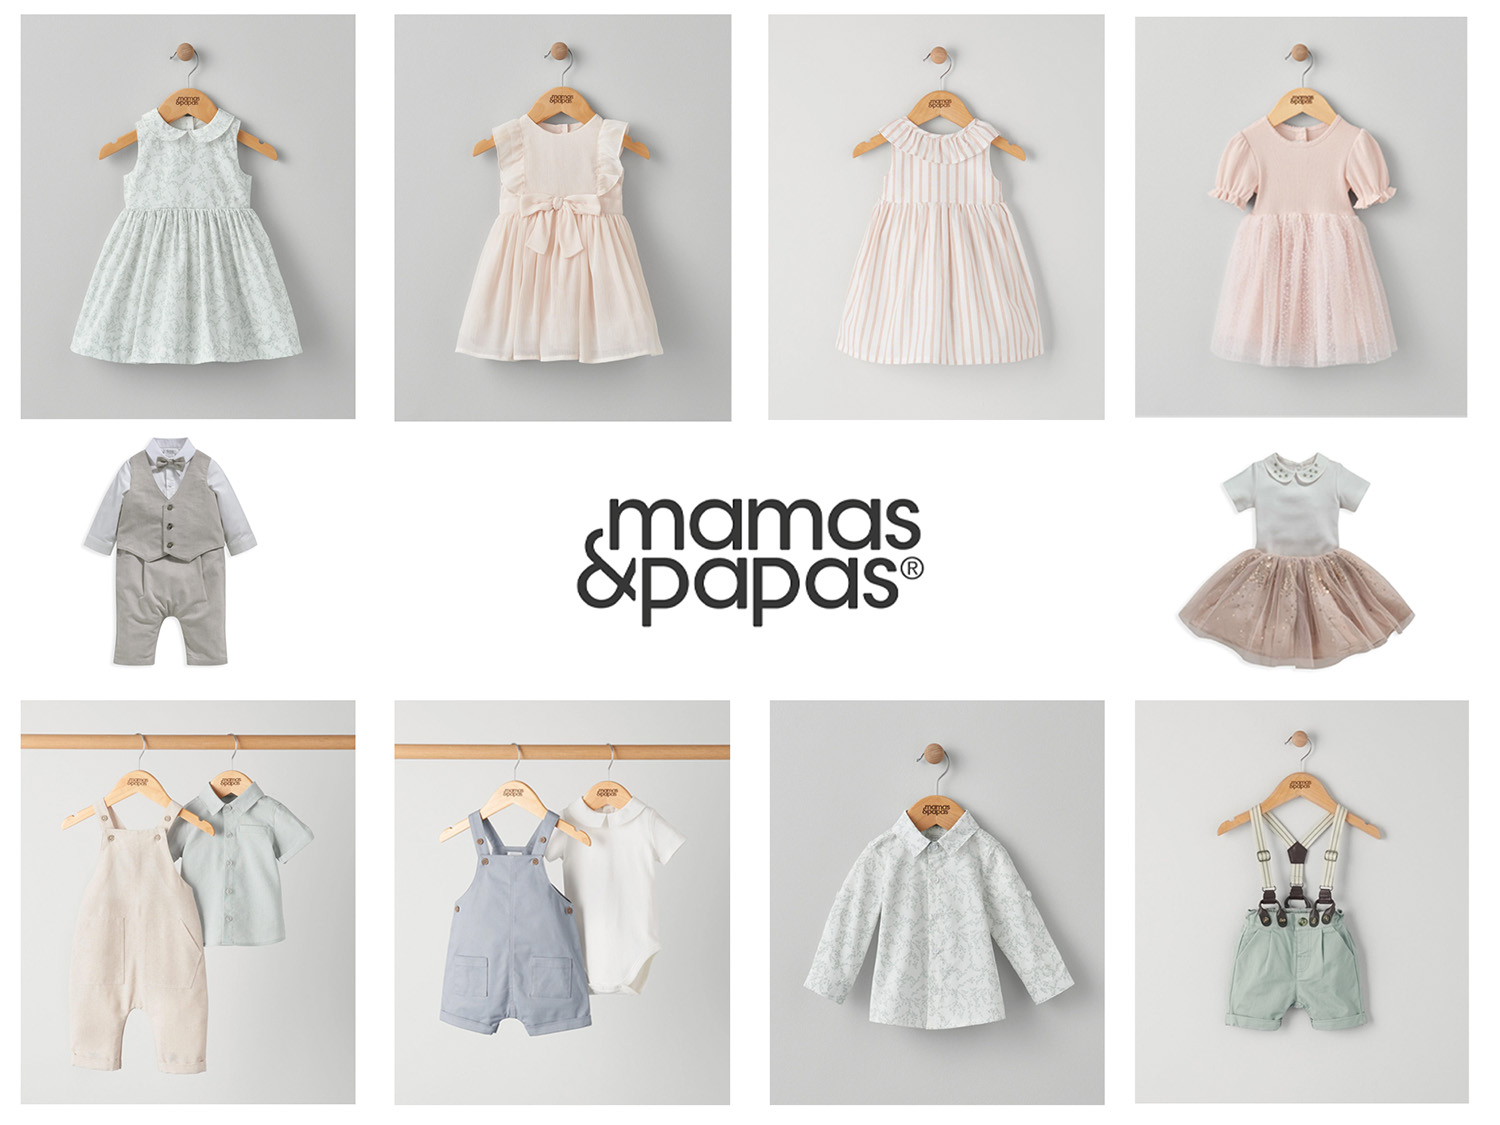 mamas and papas collection - a photoshoot of their special occasion wear 